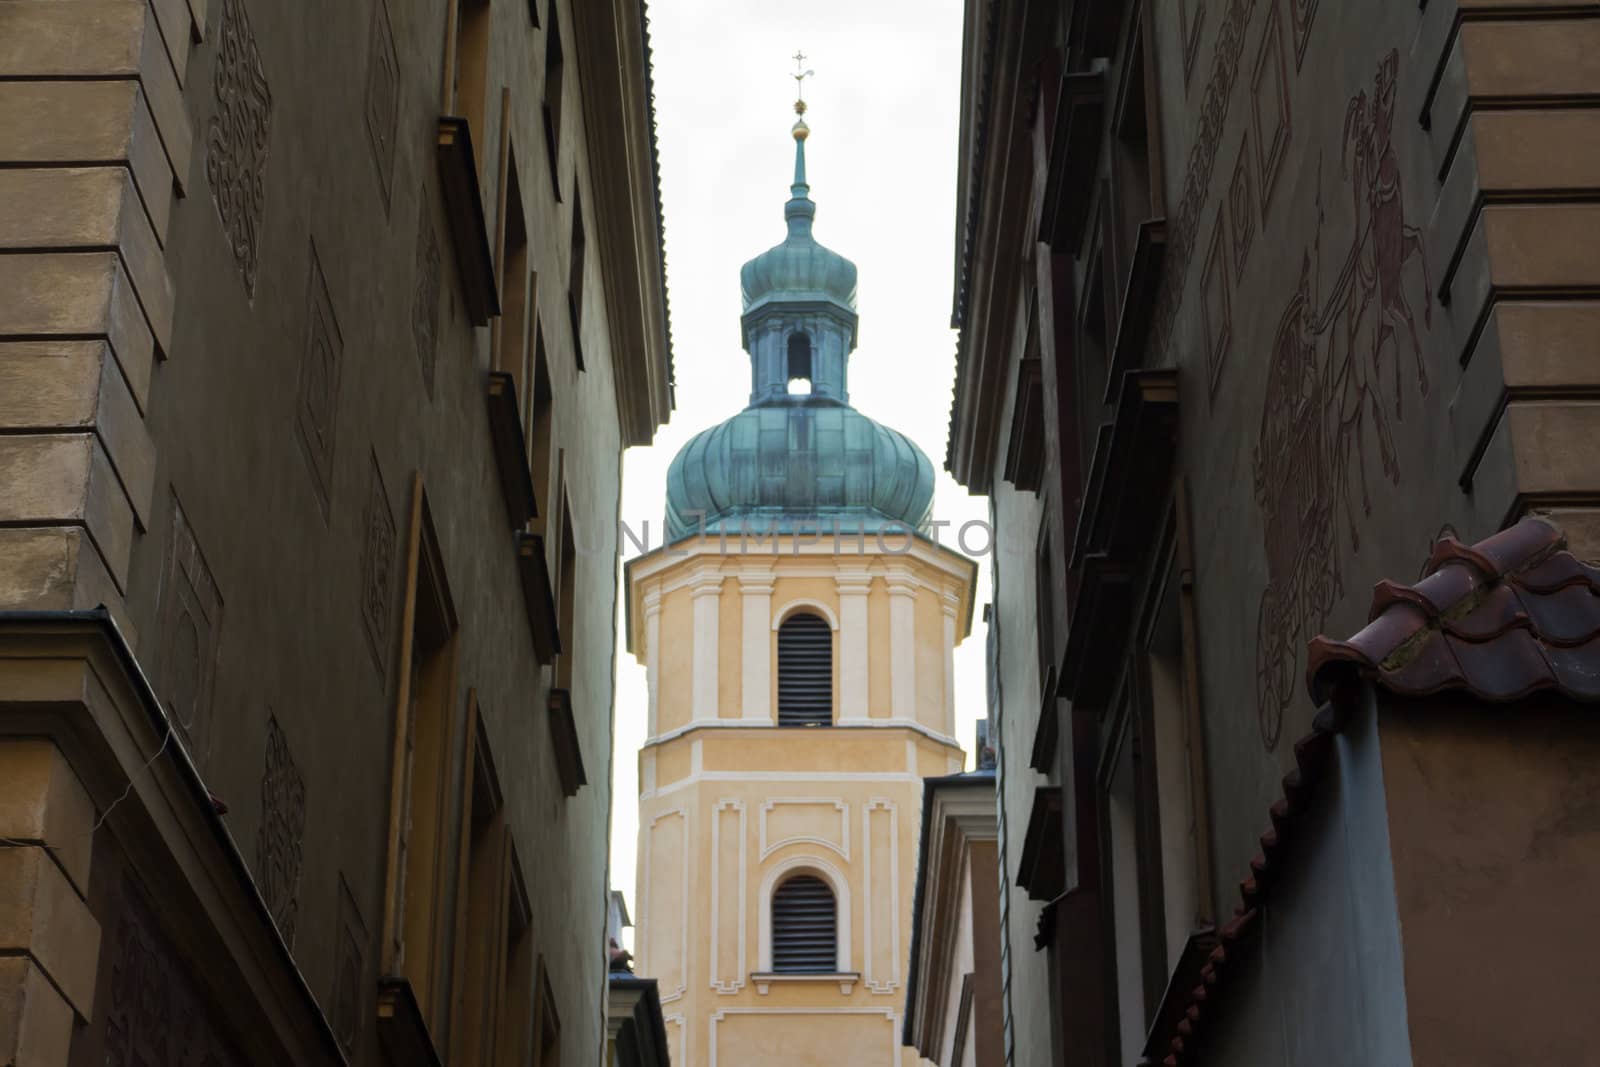 A narrow street in the center of Warsaw